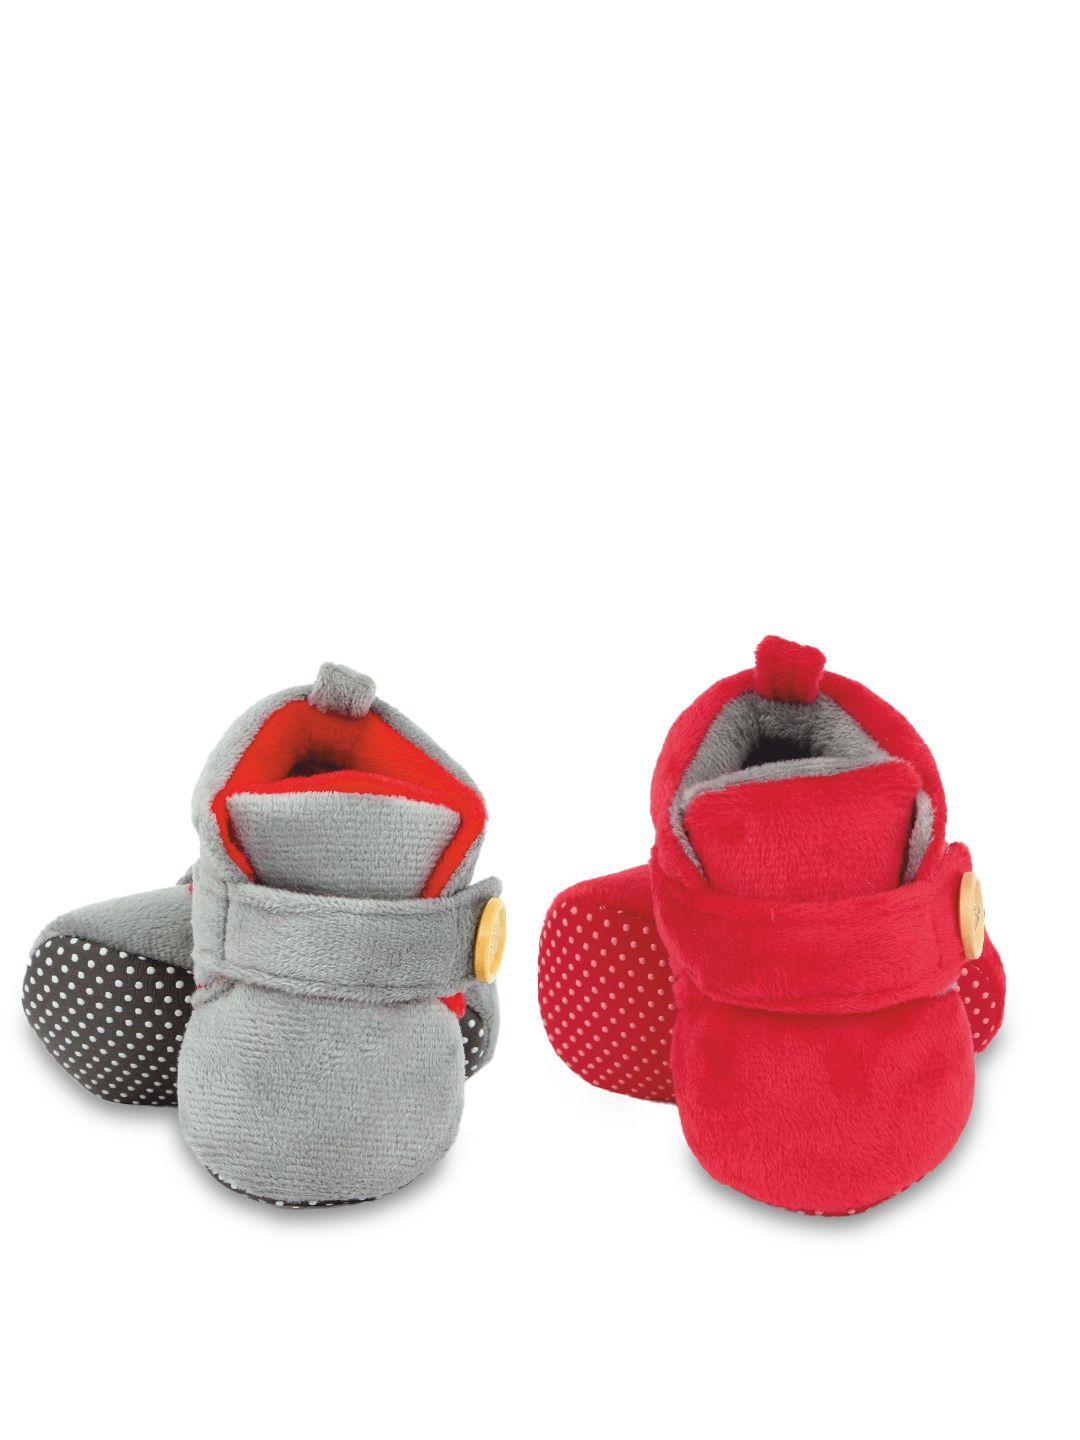 superminis set of 2 grey & red solid baby booties